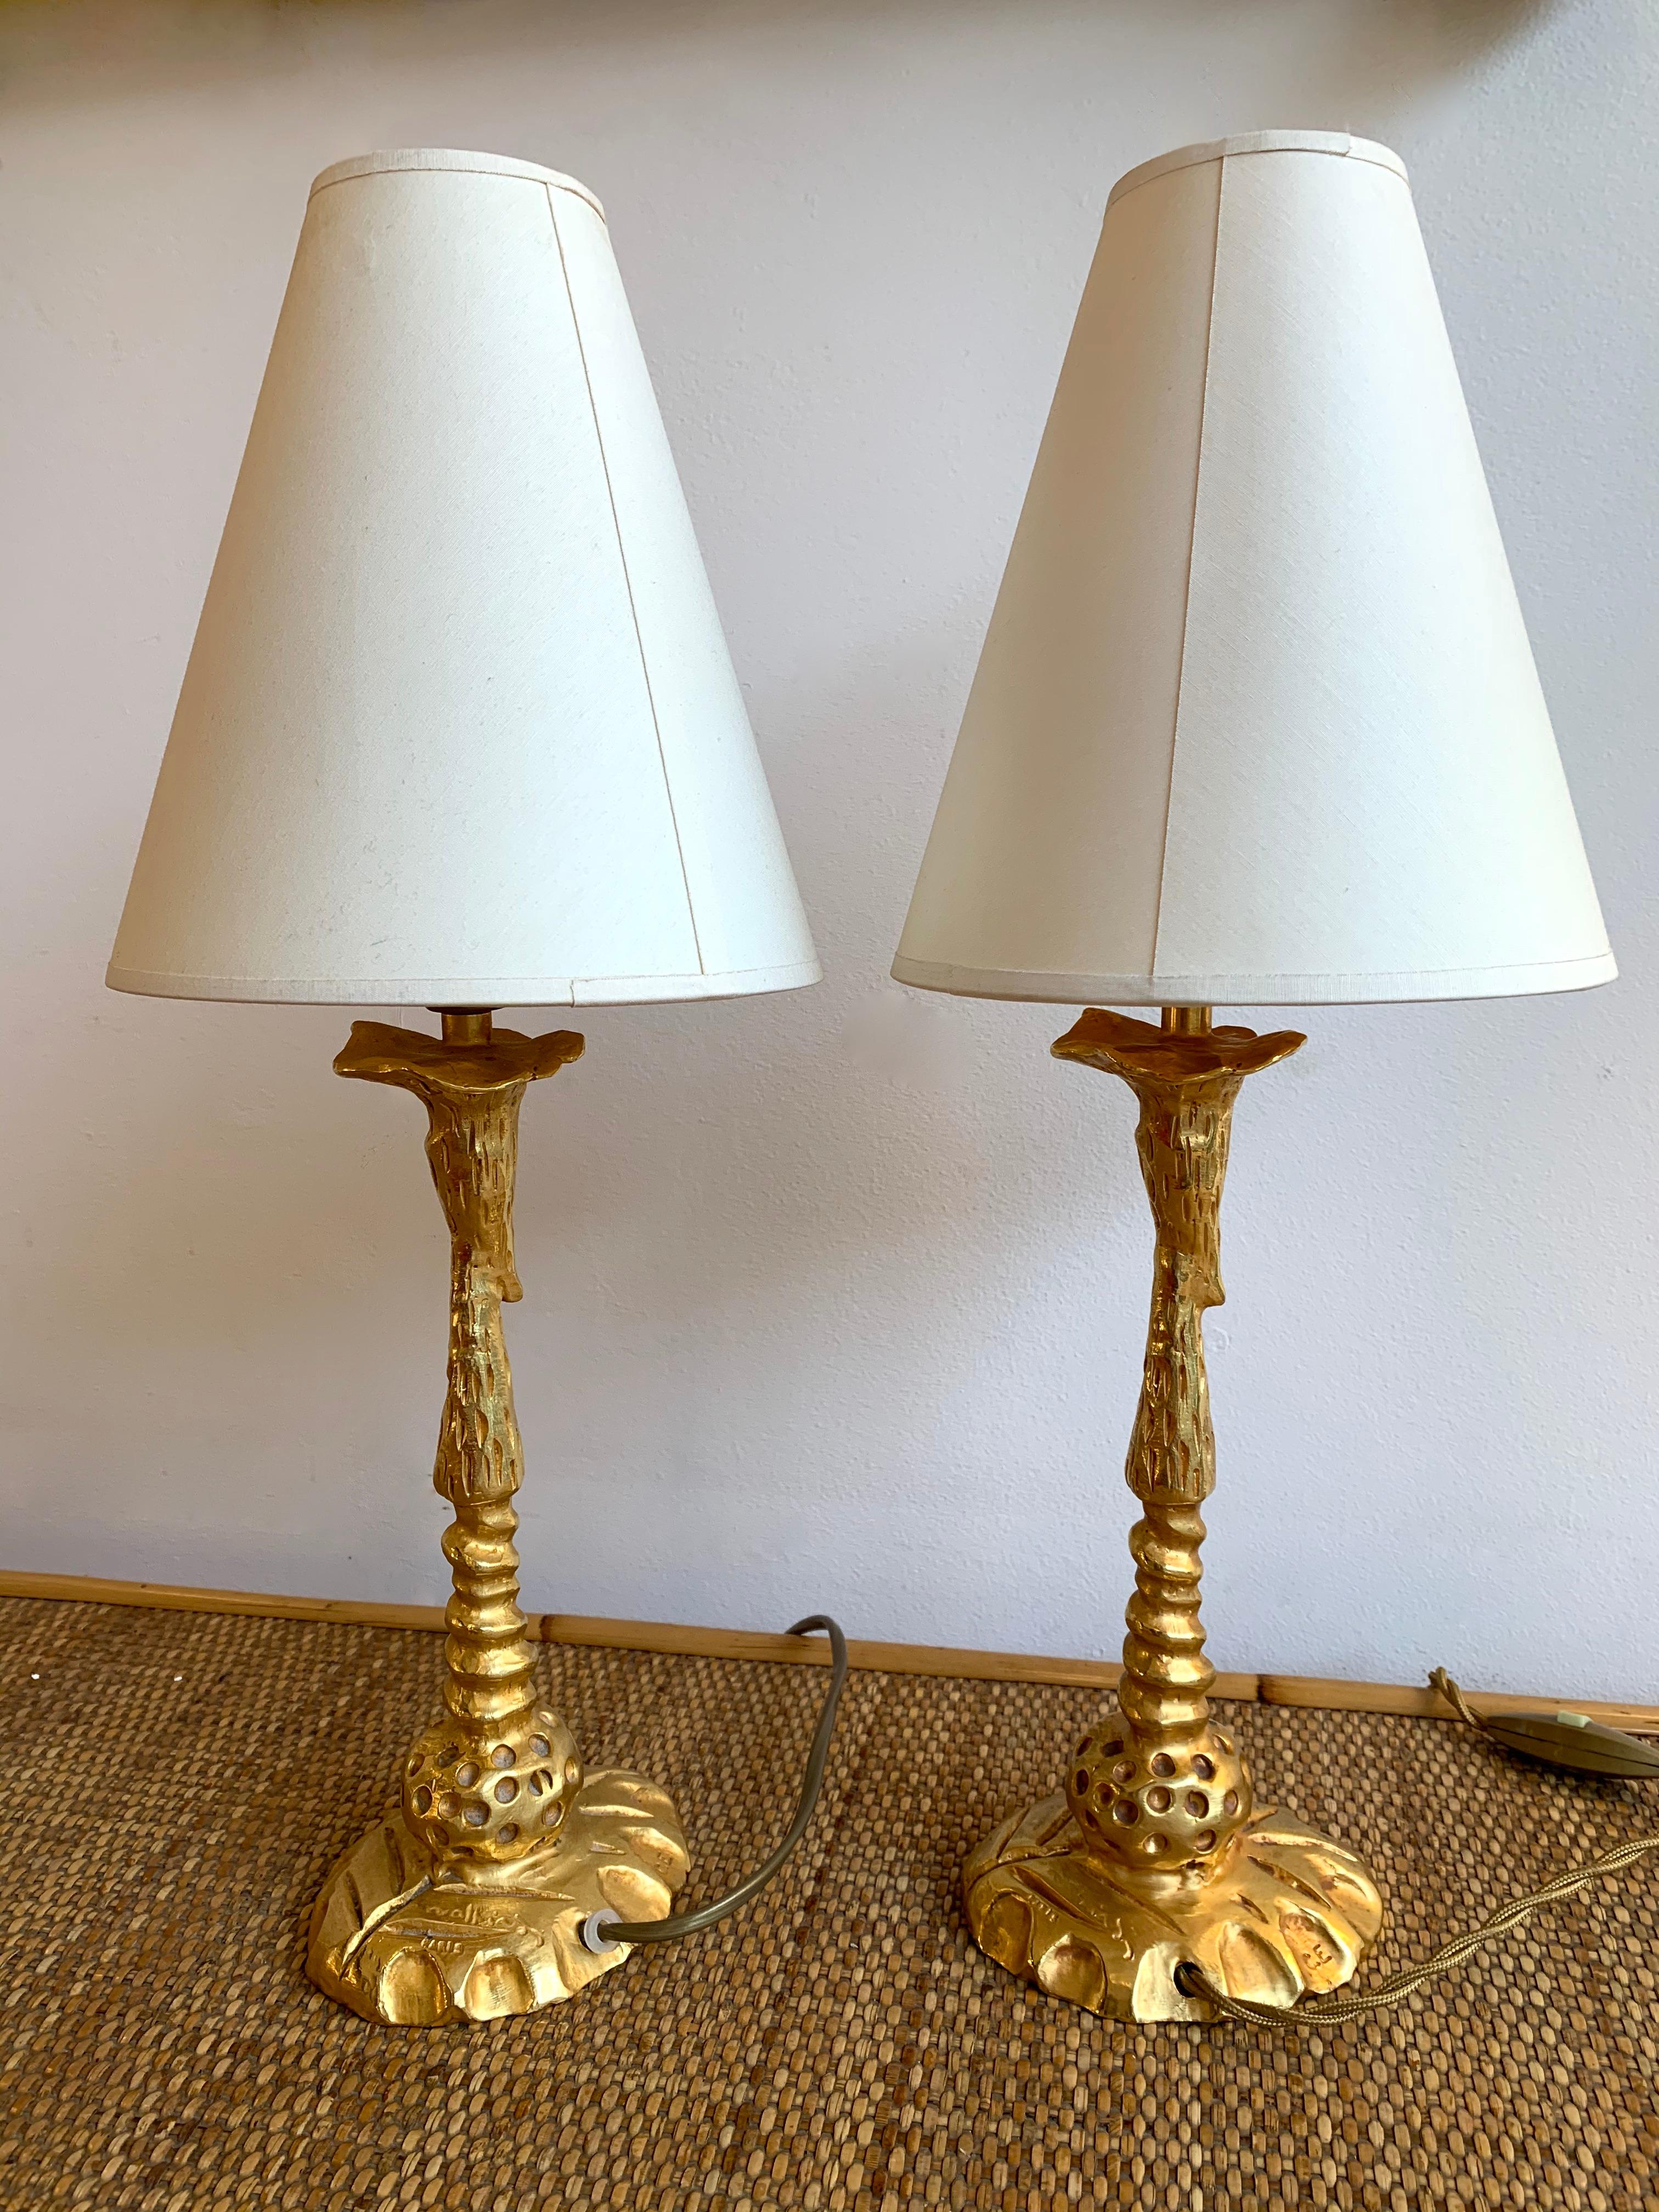 1990s lamps